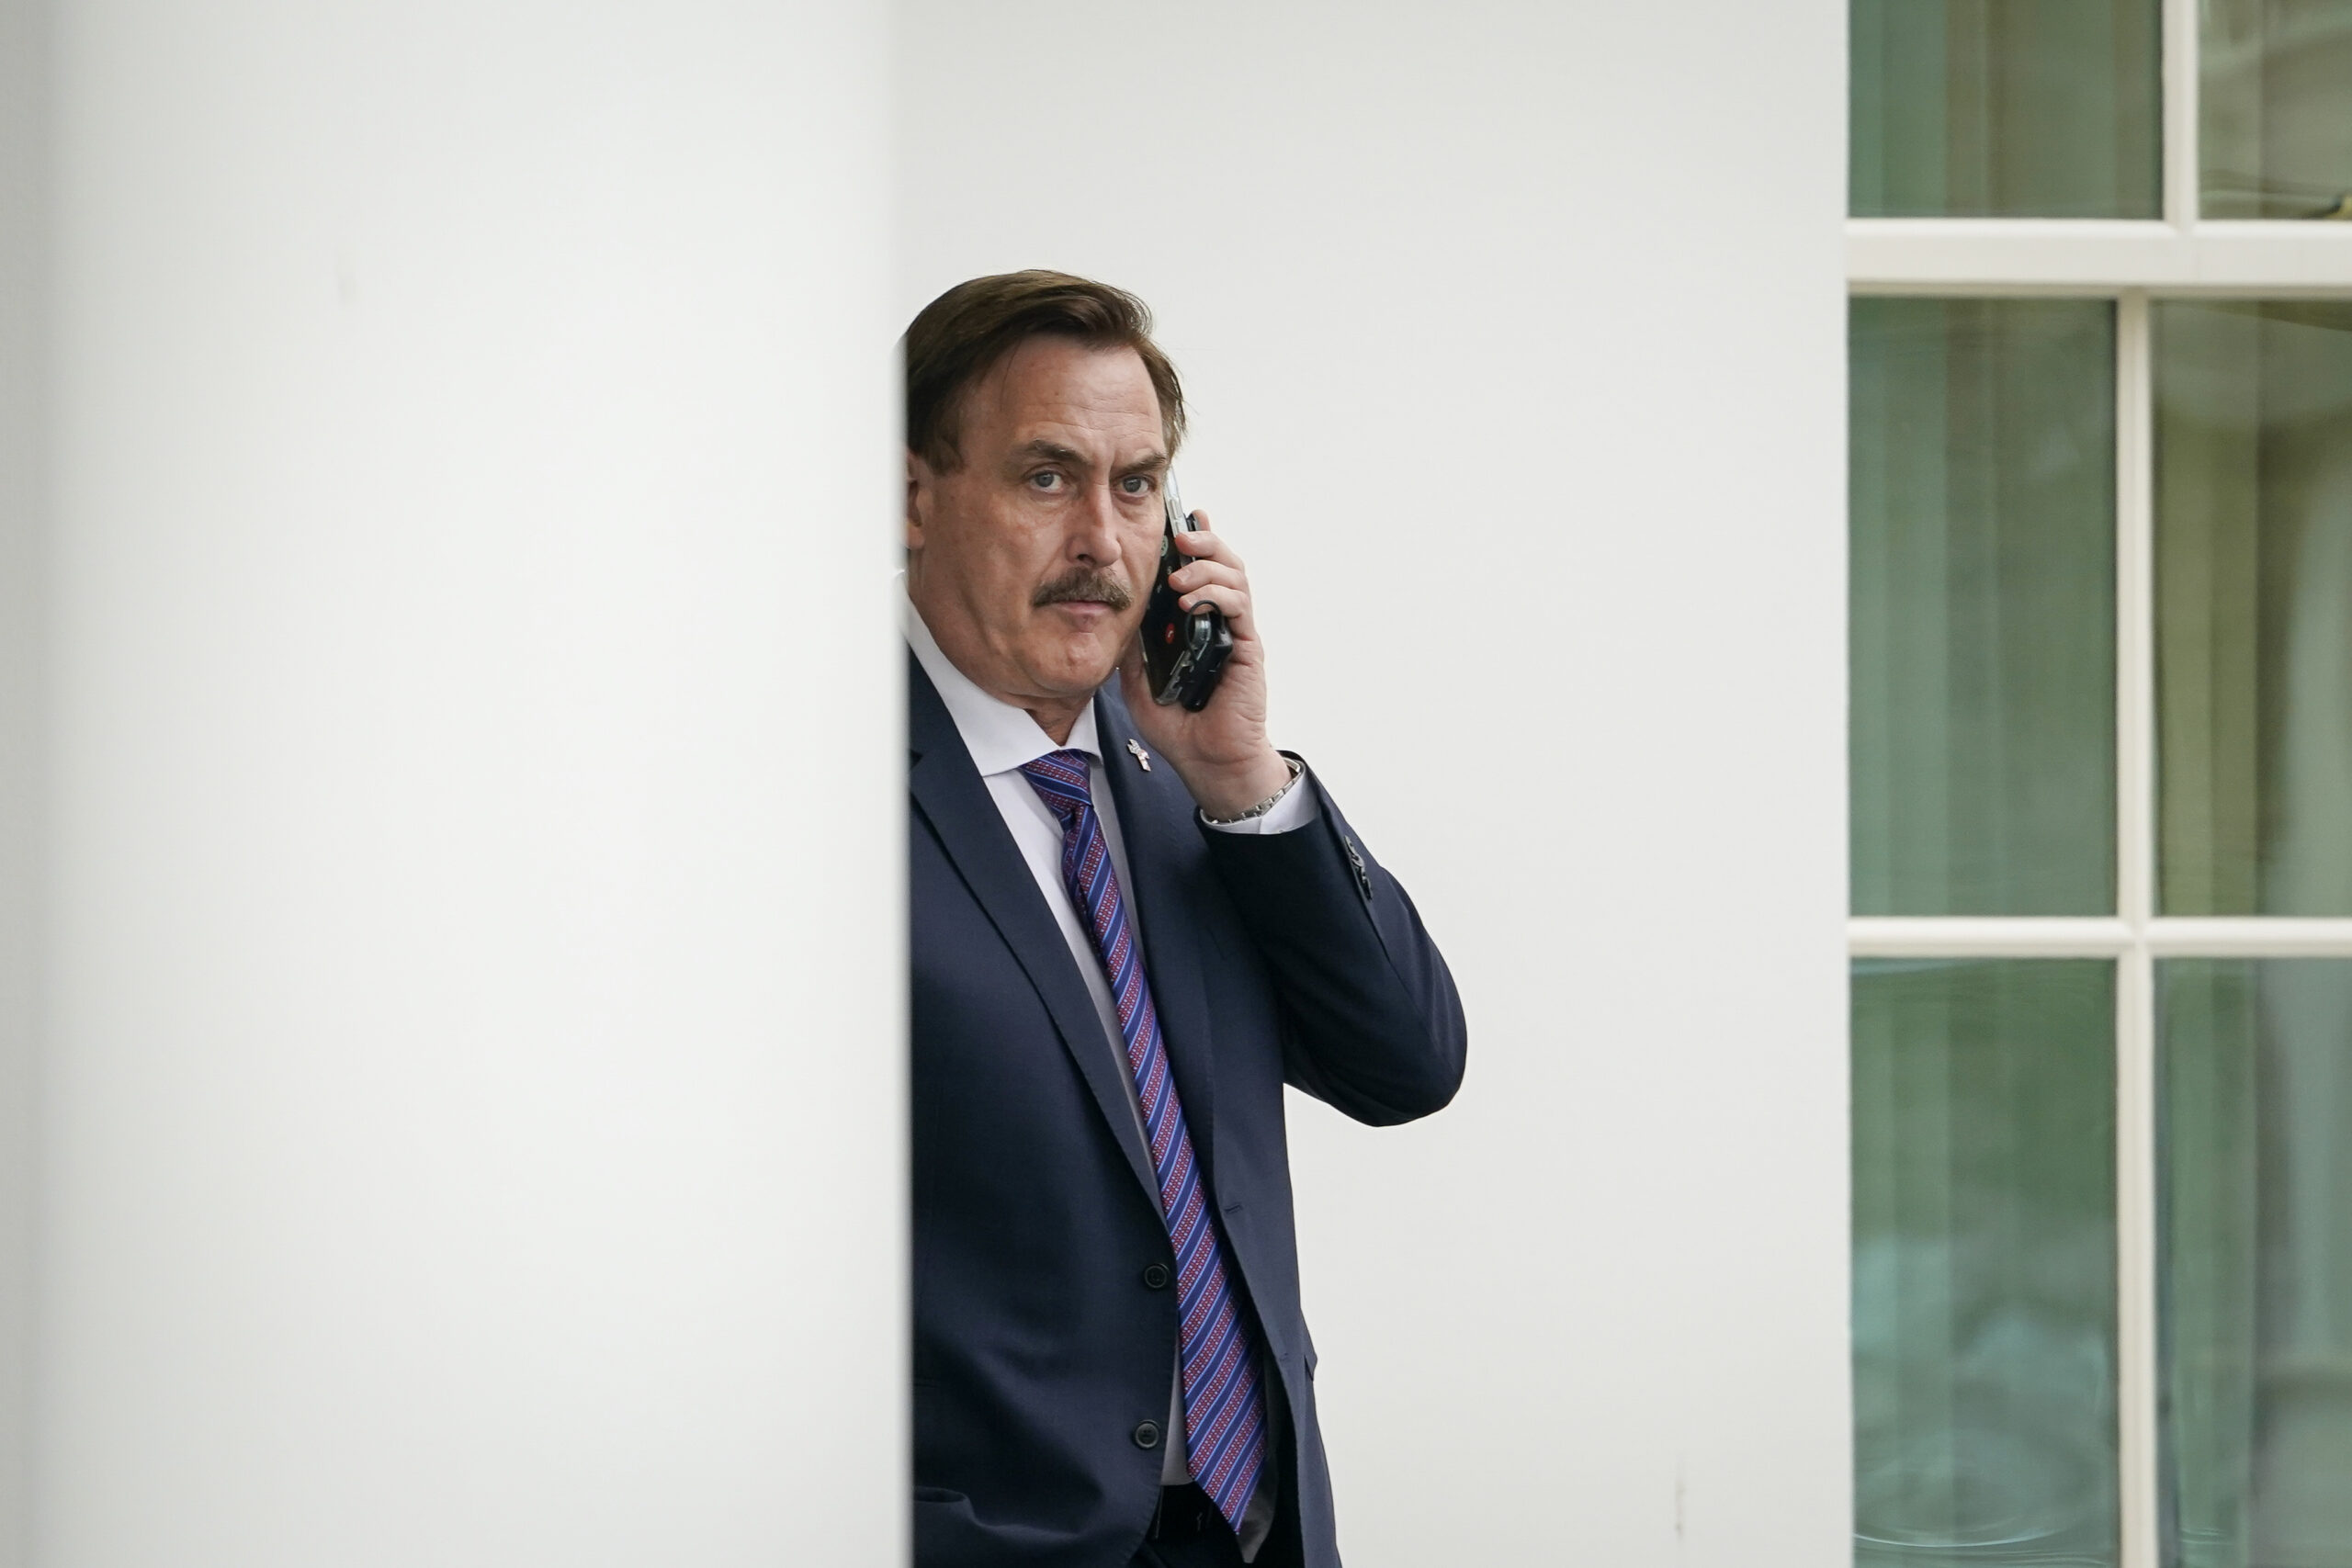 Mike Lindell at the White House